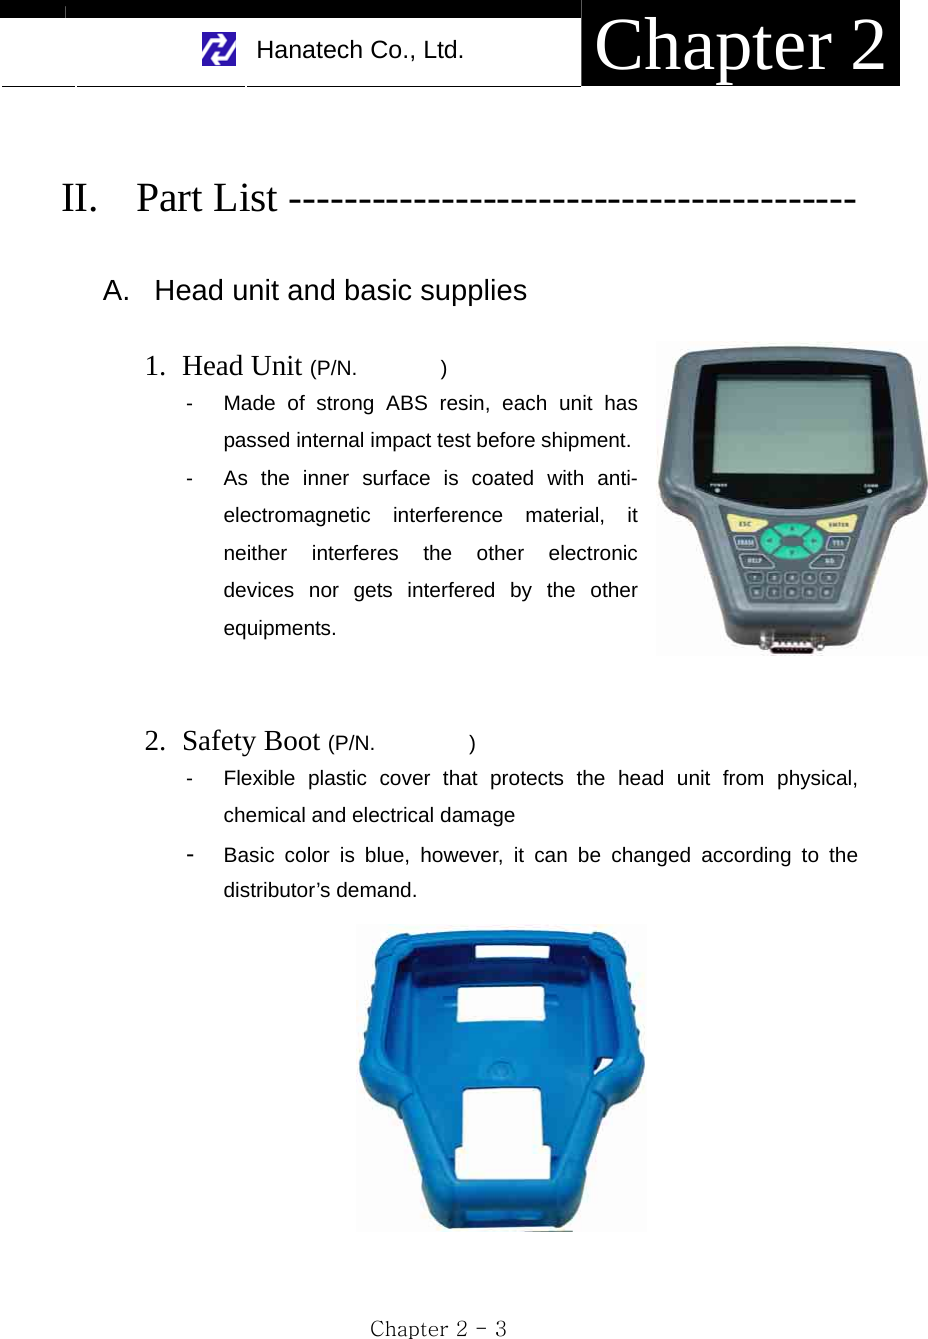     Hanatech Co., Ltd.  Chapter 2 Chapter 2 - 3  II. Part List -----------------------------------------  A.  Head unit and basic supplies  1. Head Unit (P/N.        ) -  Made of strong ABS resin, each unit has passed internal impact test before shipment.   -  As the inner surface is coated with anti-electromagnetic interference material, it neither interferes the other electronic devices nor gets interfered by the other equipments.   2. Safety Boot (P/N.         ) -  Flexible plastic cover that protects the head unit from physical, chemical and electrical damage -  Basic color is blue, however, it can be changed according to the distributor’s demand.   